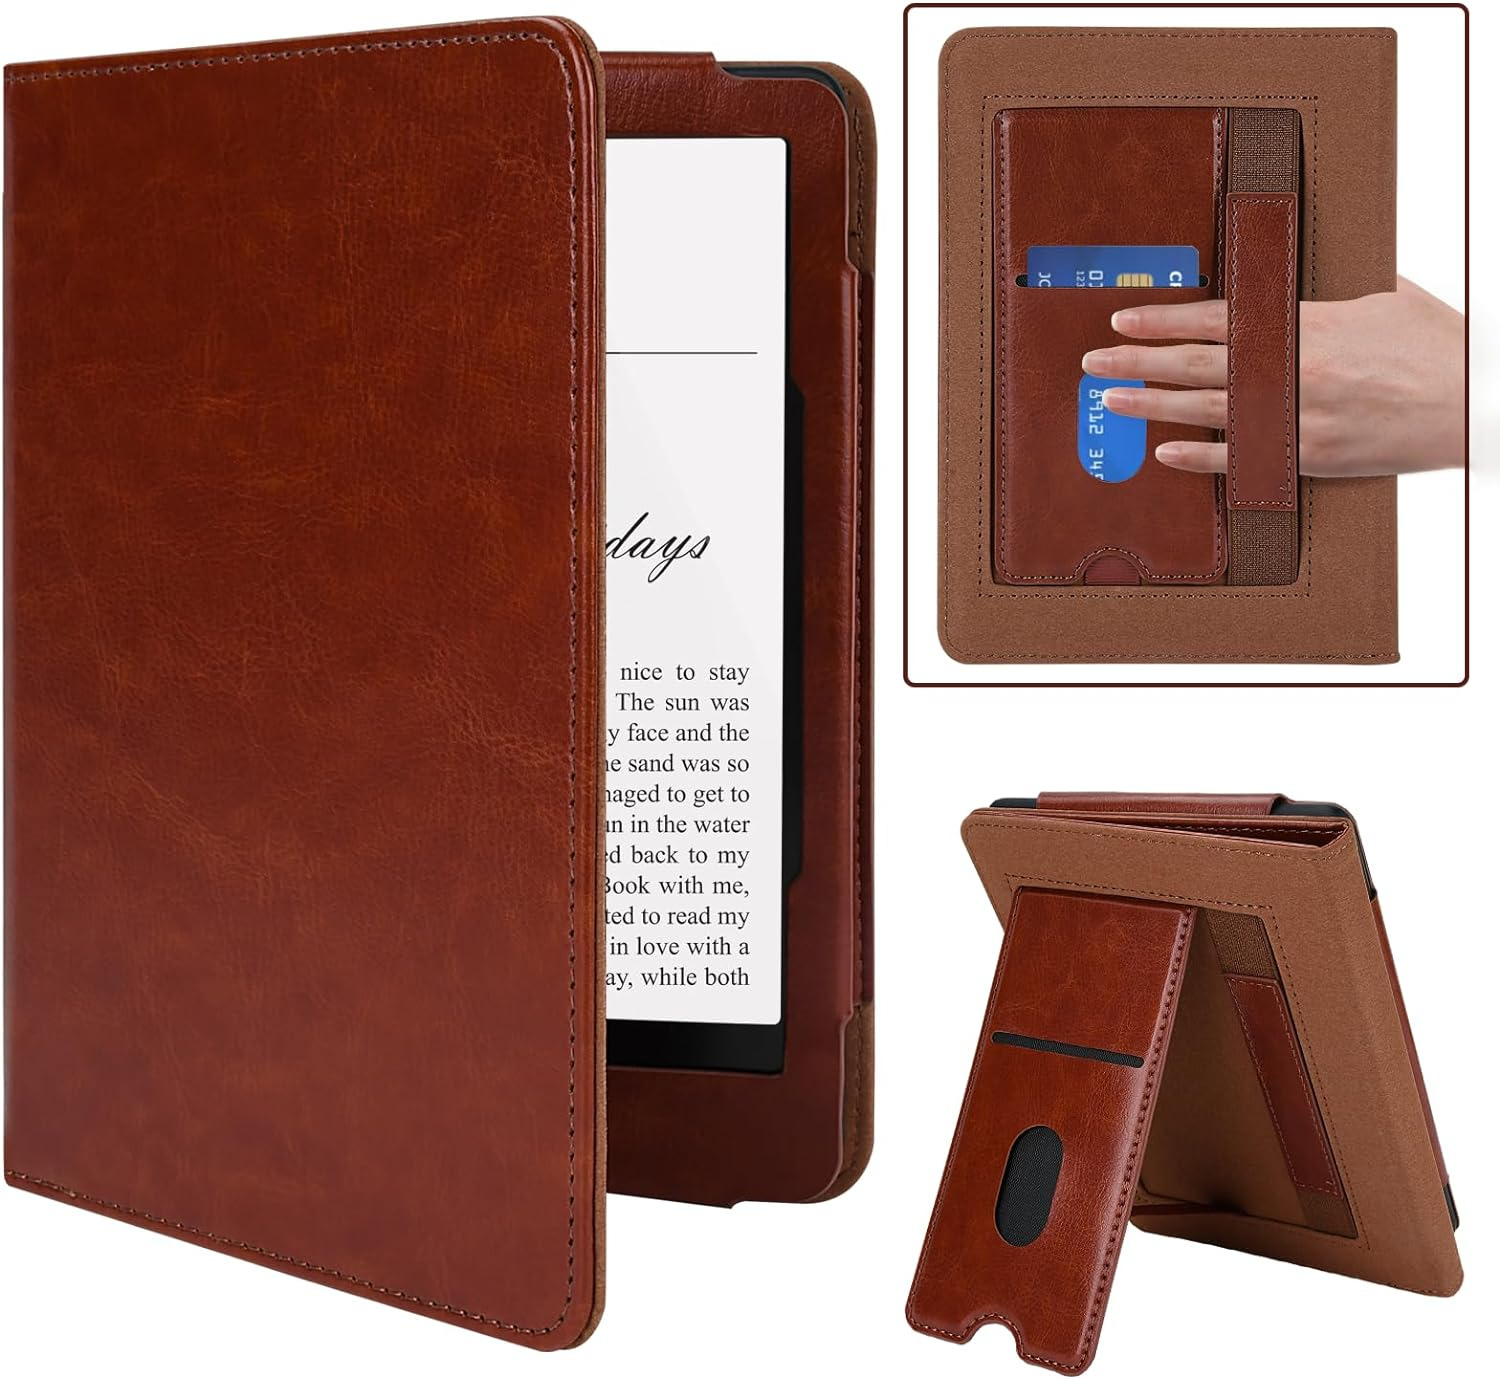 Case for Kindle Paperwhite - All New PU Leather Smart Cover with Auto Sleep Wake